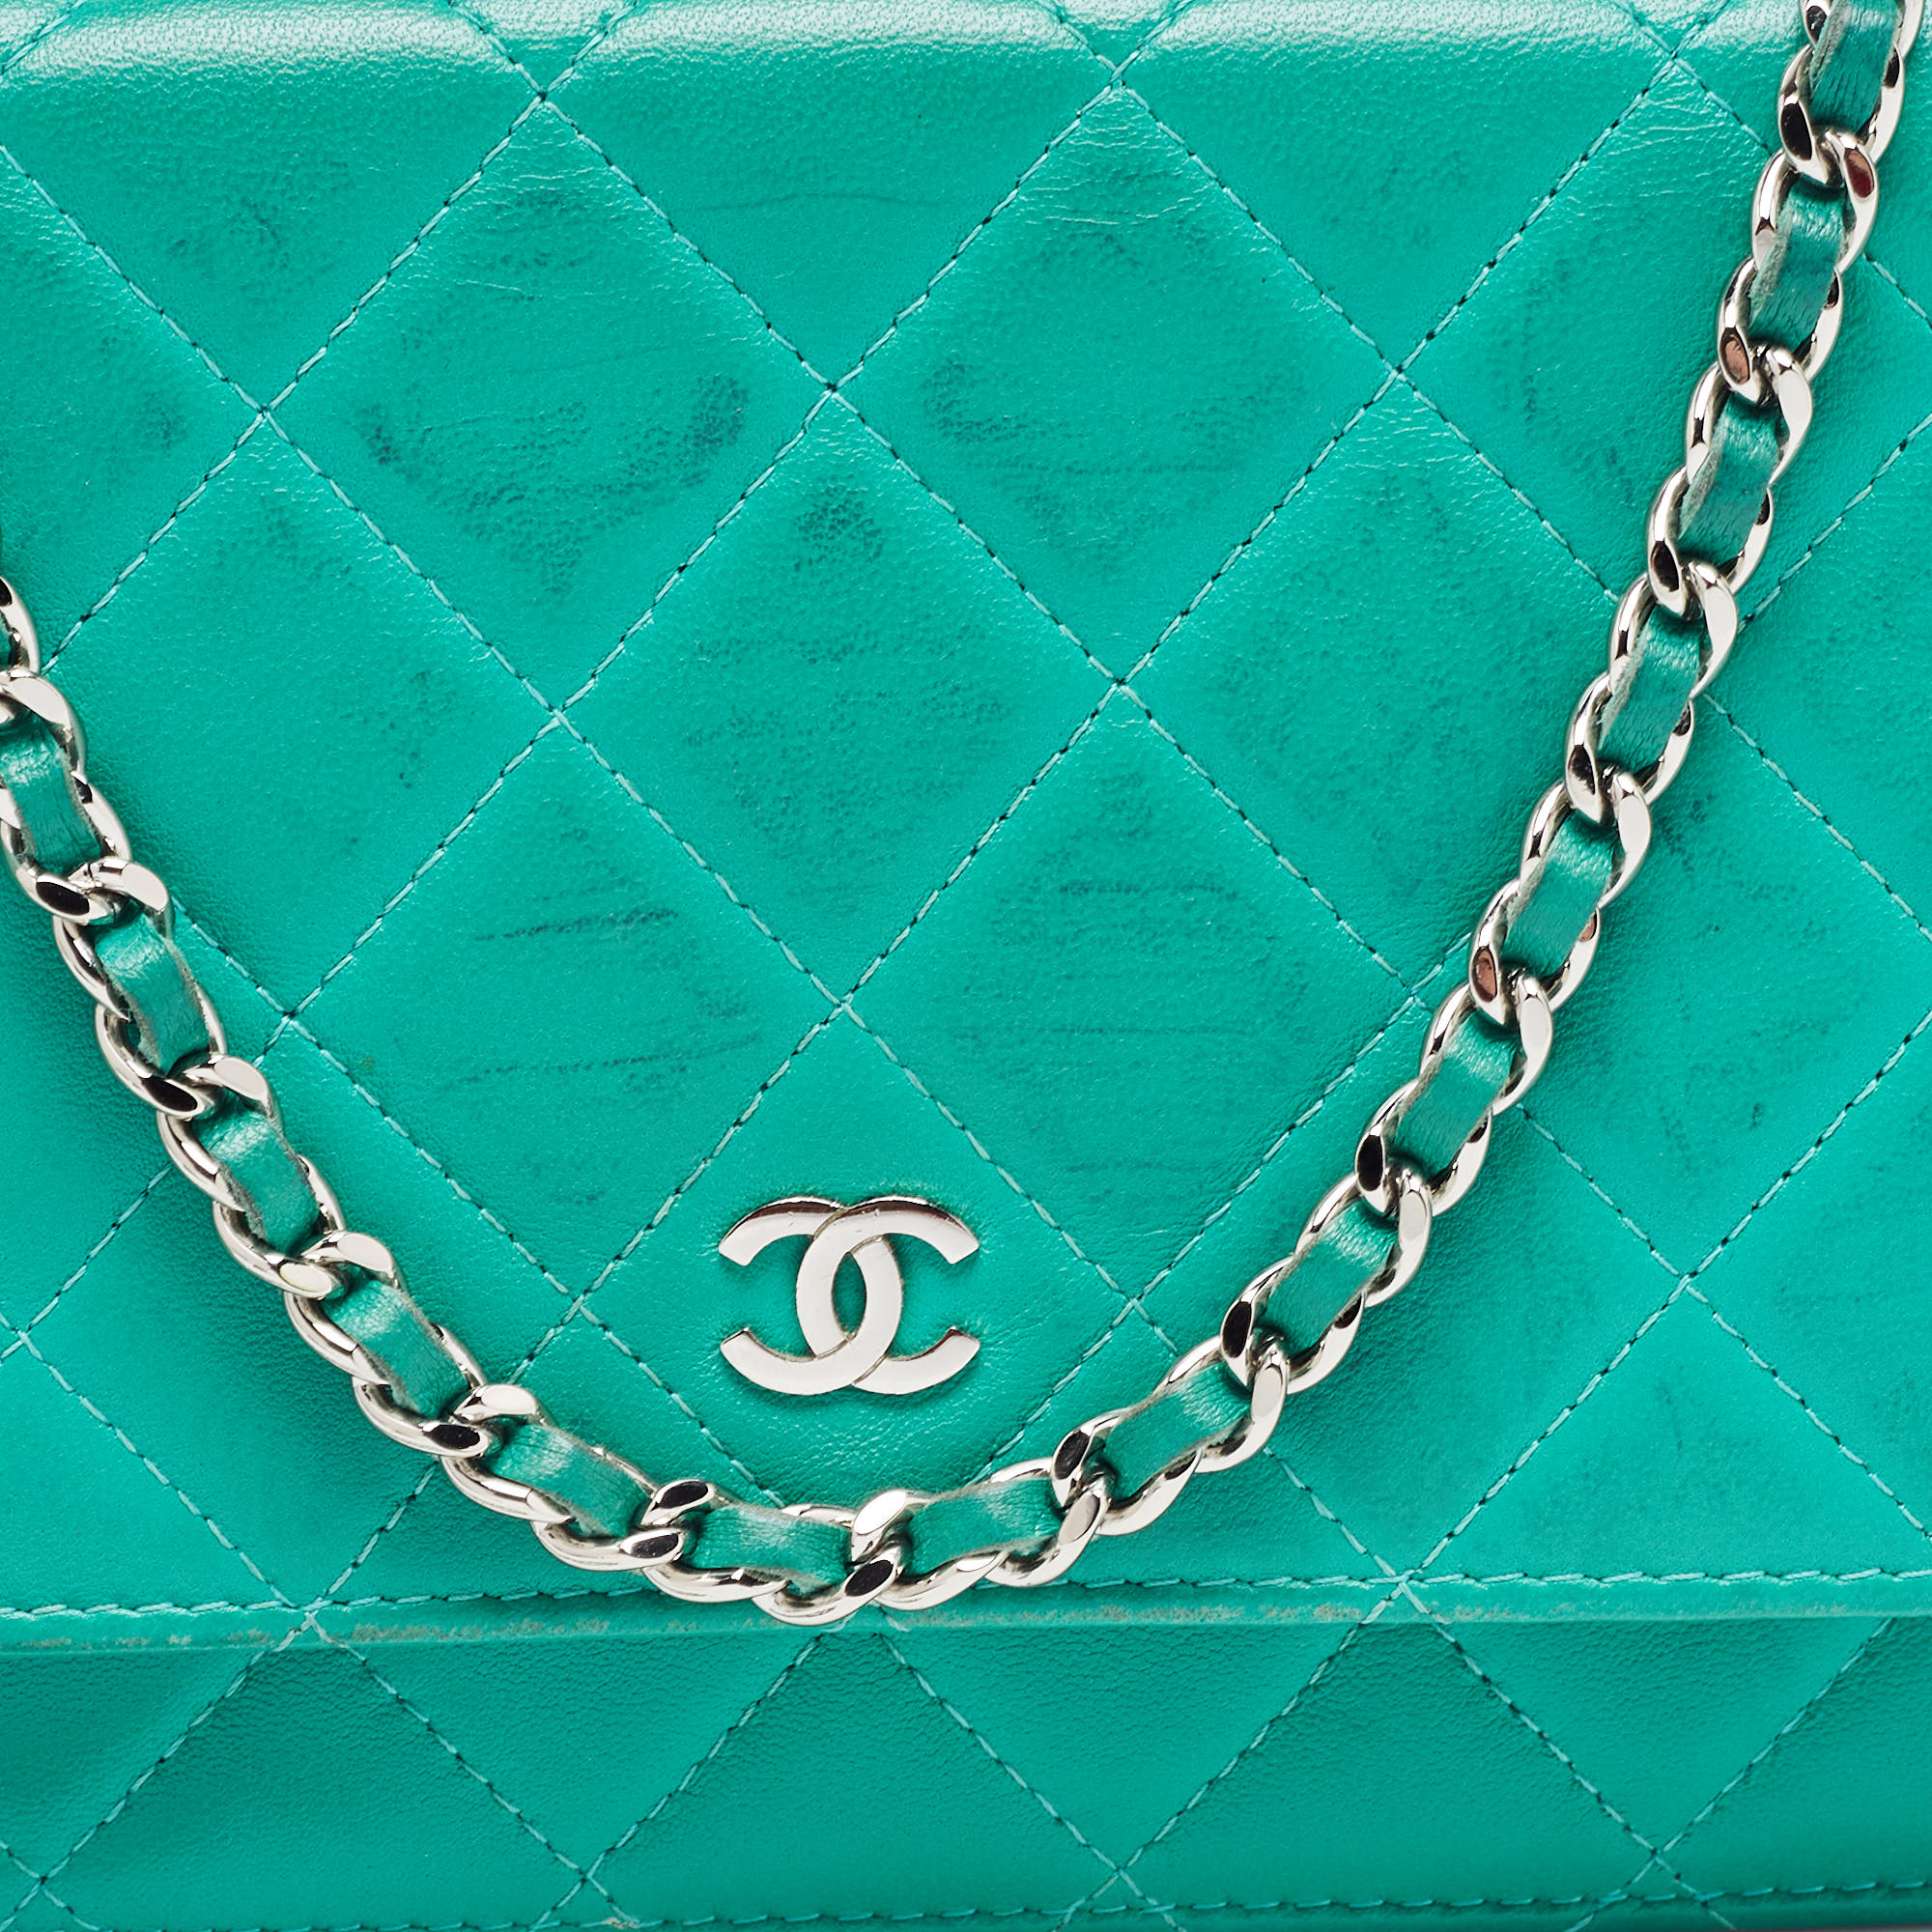 Chanel Green Leather CC Wallet On Chain